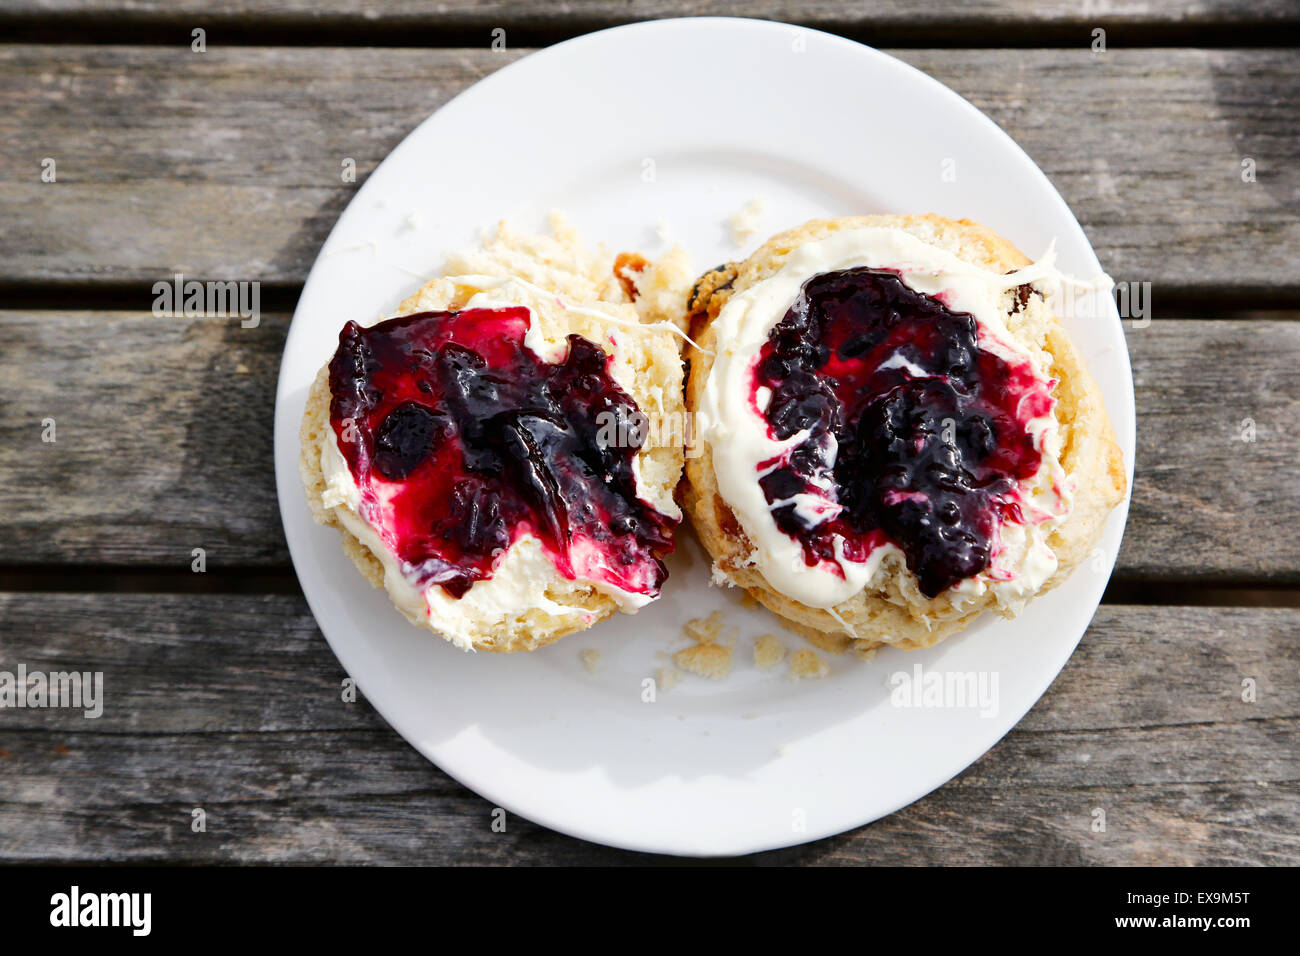 A traditional english Scone cut in half and spread with Cream and Jam. Part of a traditional English cream tea served outdoors Stock Photo